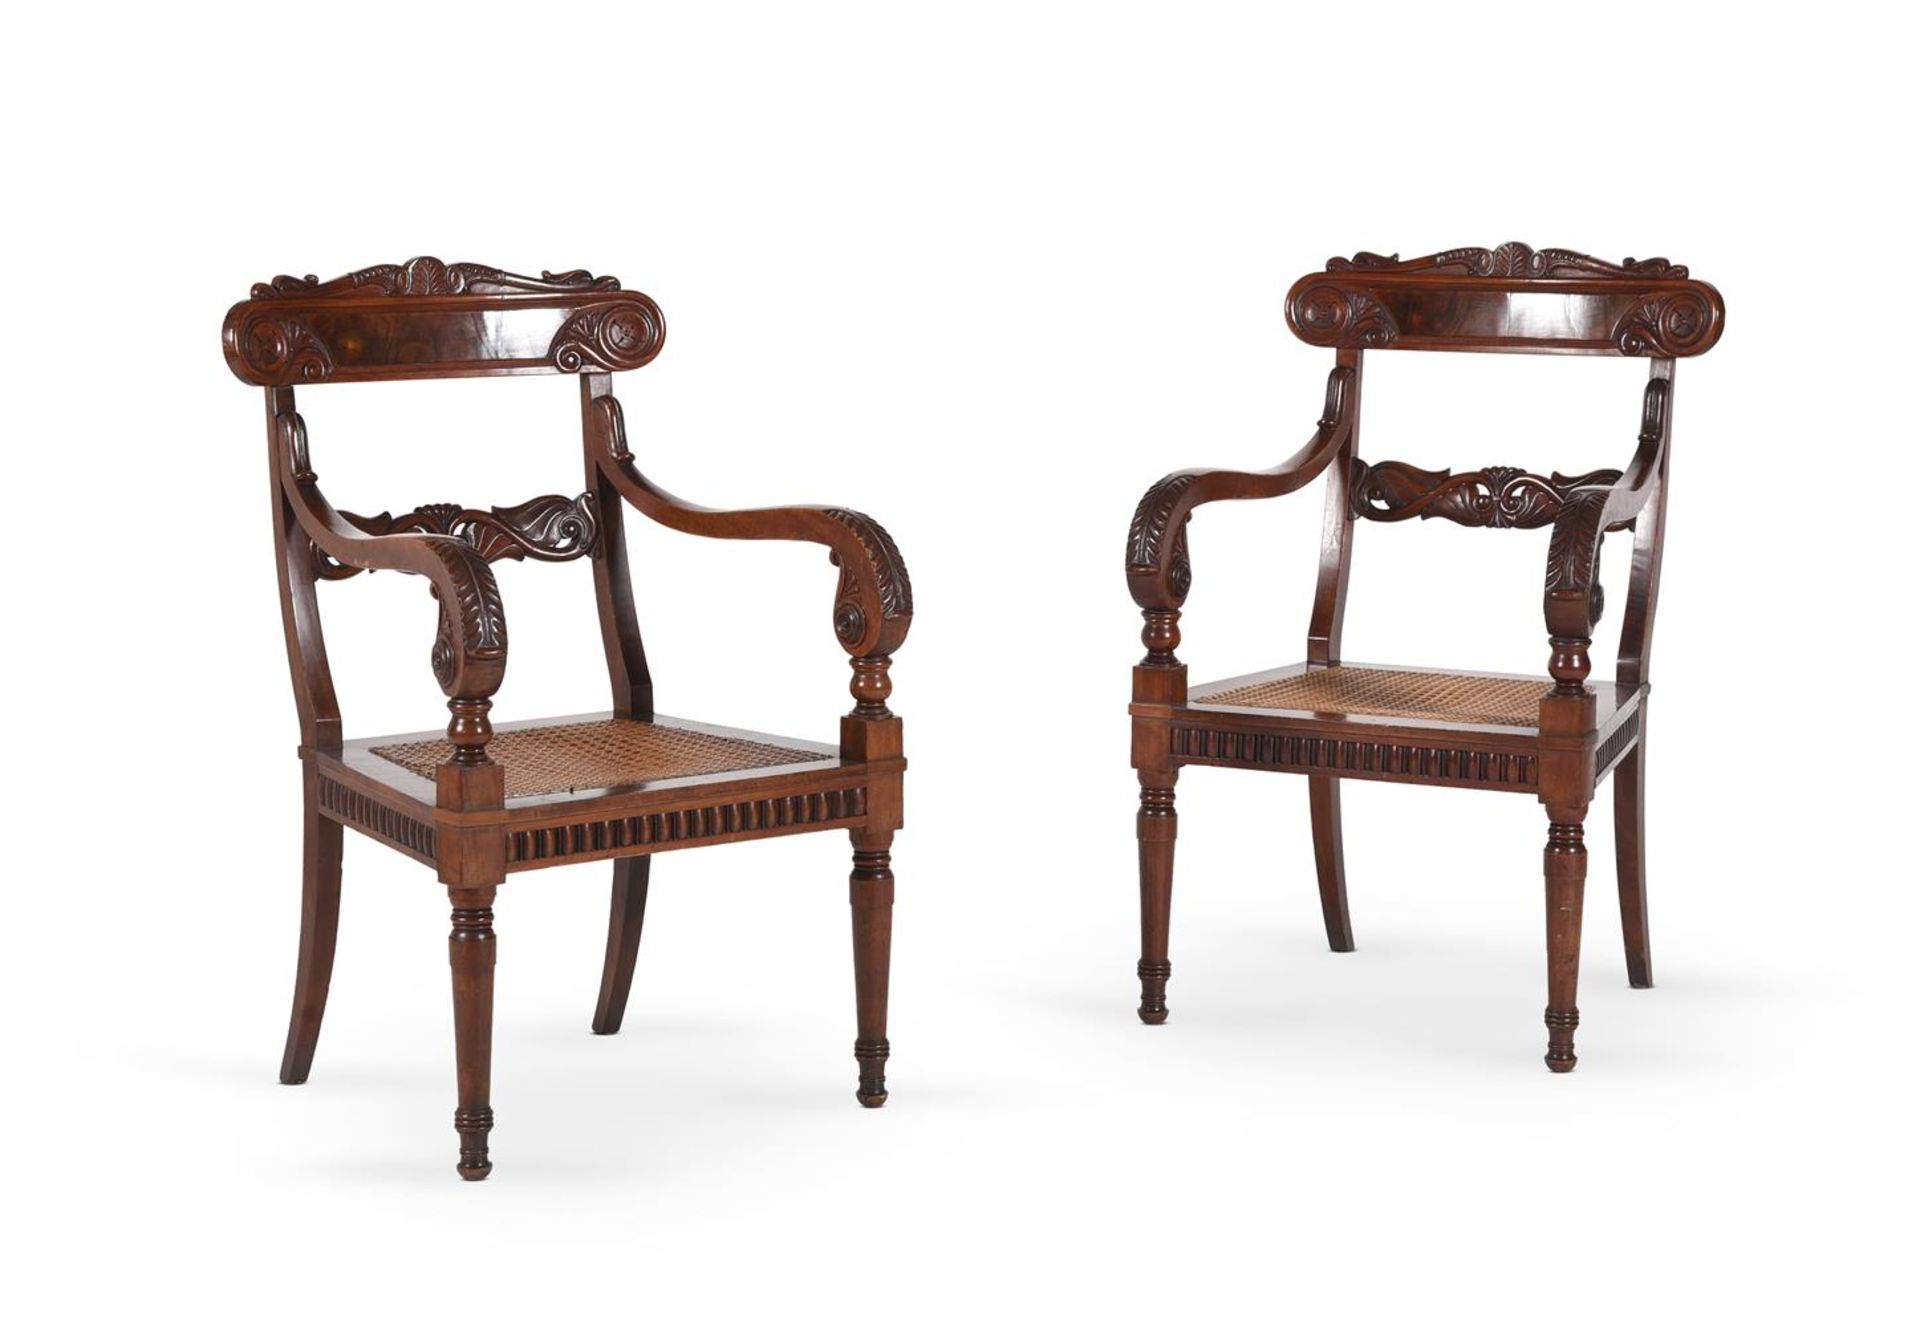 A SET OF FOUR WILLIAM IV MAHOGANY ARMCHAIRS, IN THE MANNER OF GILLOWS, CIRCA 1835 - Image 8 of 9